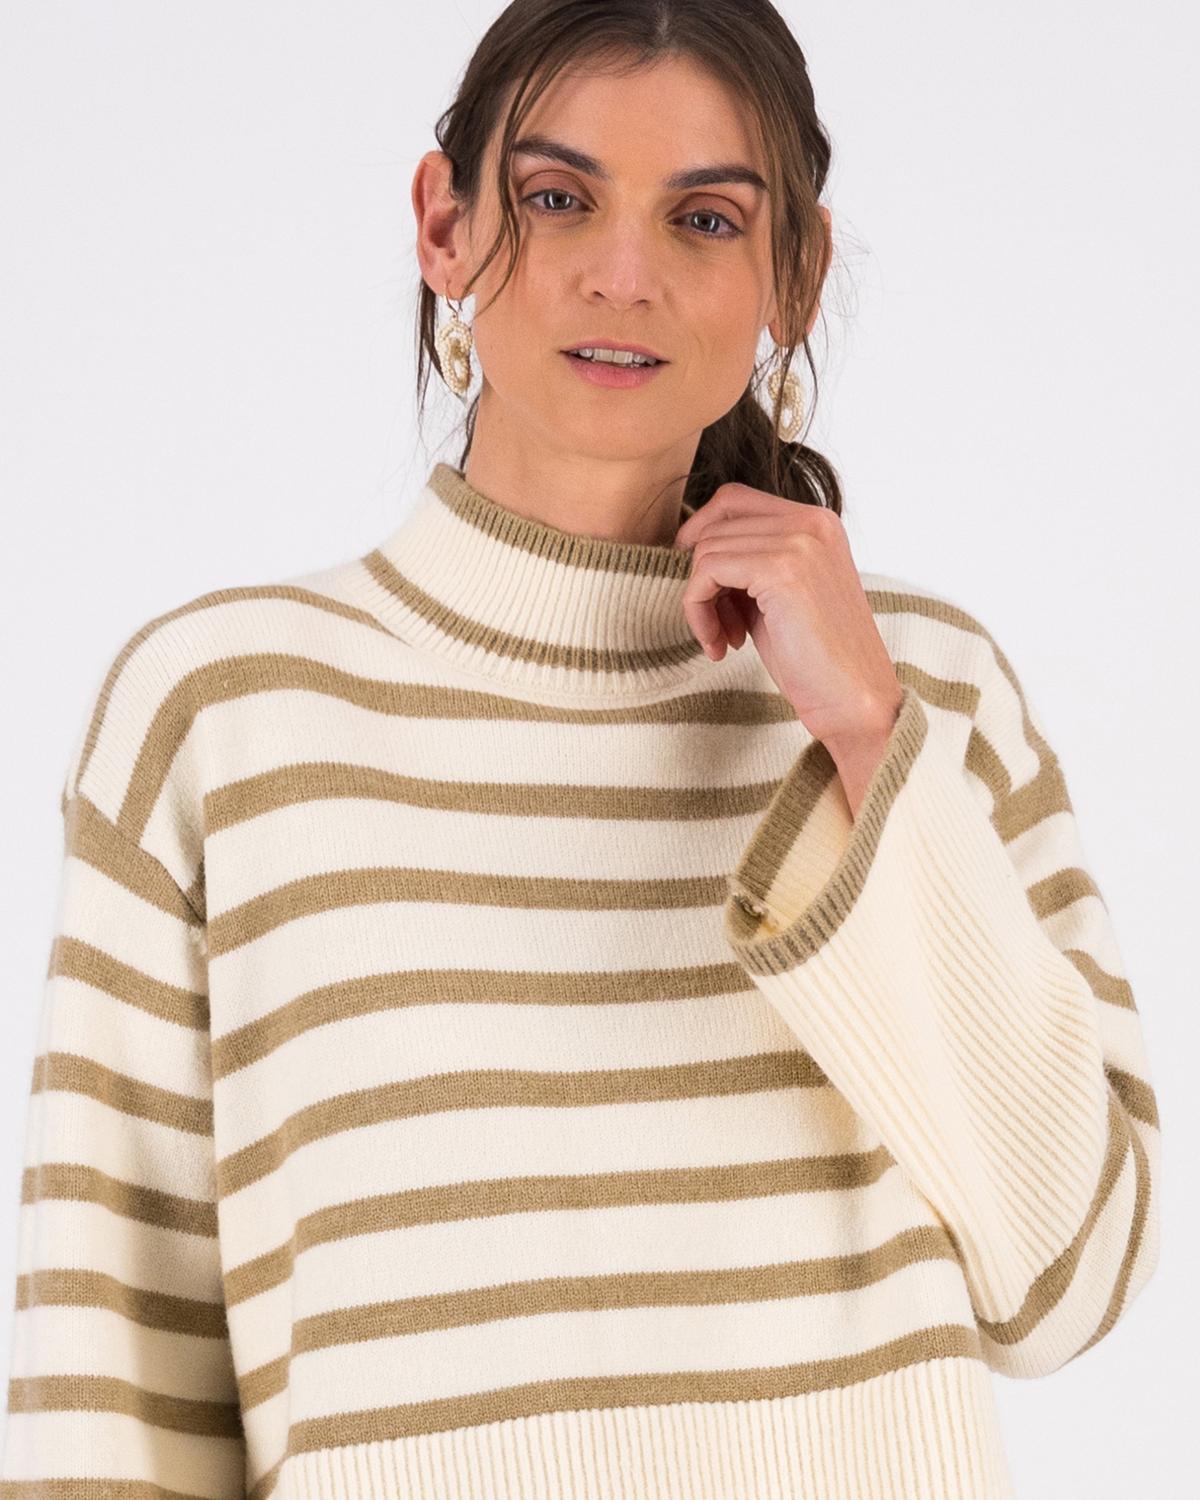 Romie Striped Jumper - Poetry Clothing Store